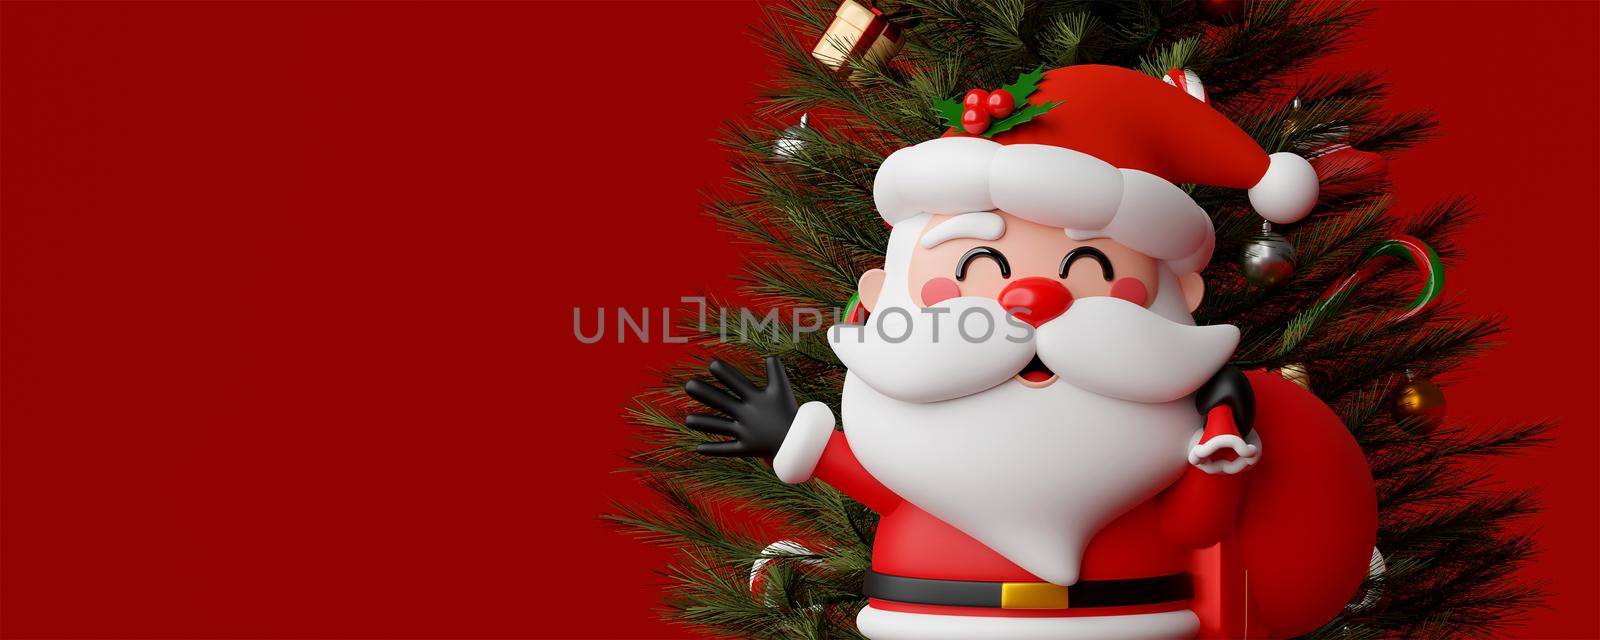 3d illustration Christmas banner of Santa Claus with Christmas tree